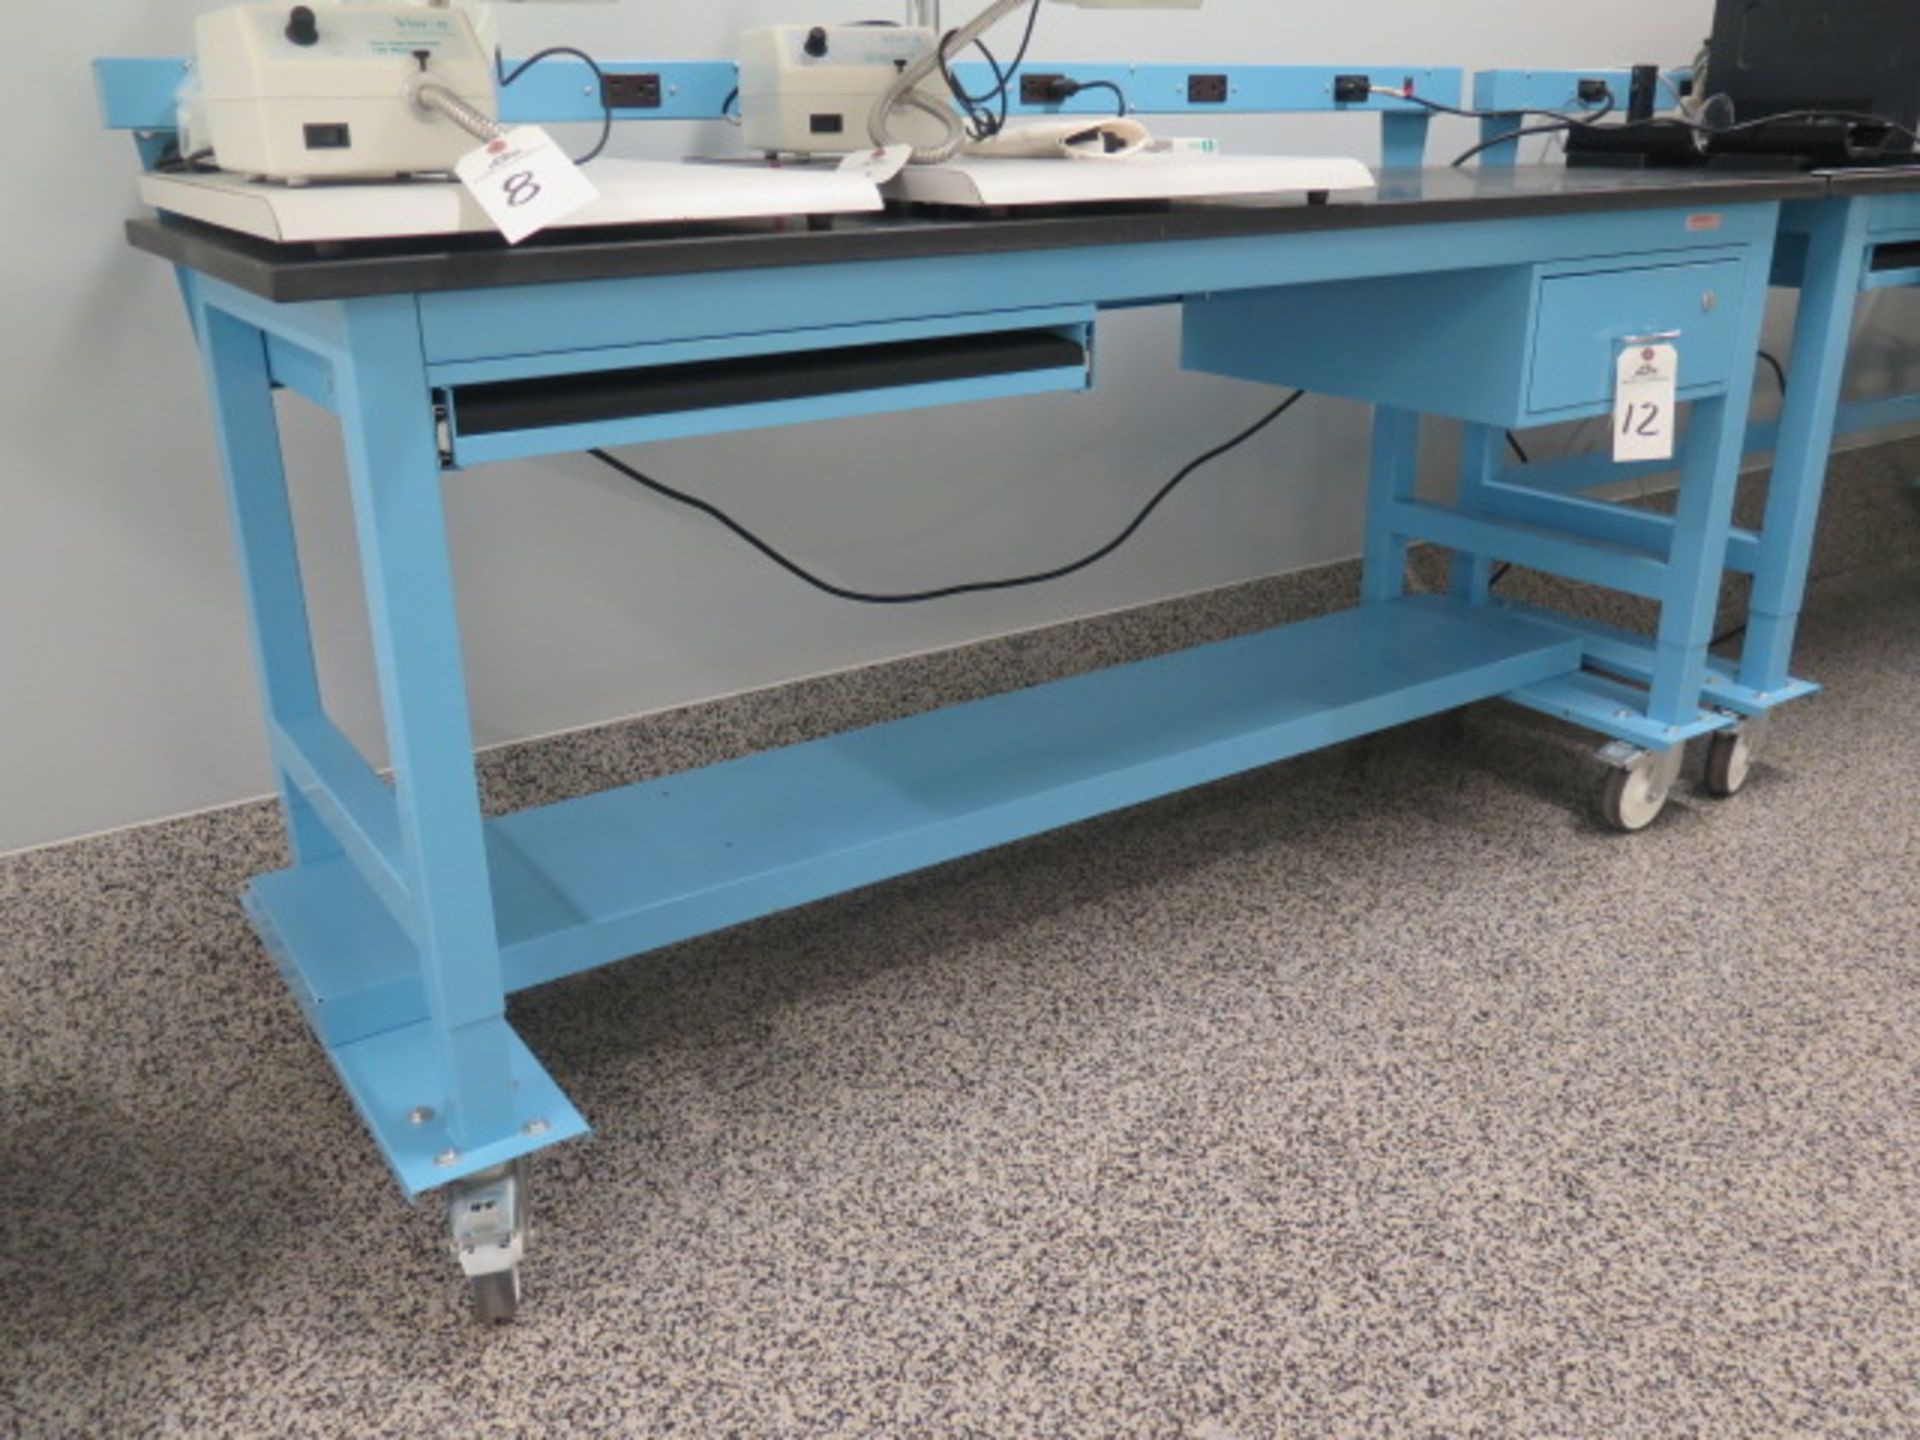 Workplace Modular Bench Systems 24" x 72" Rolling Lab Bench w/ Acid Proof Top | Loading Price: $25 - Image 2 of 4